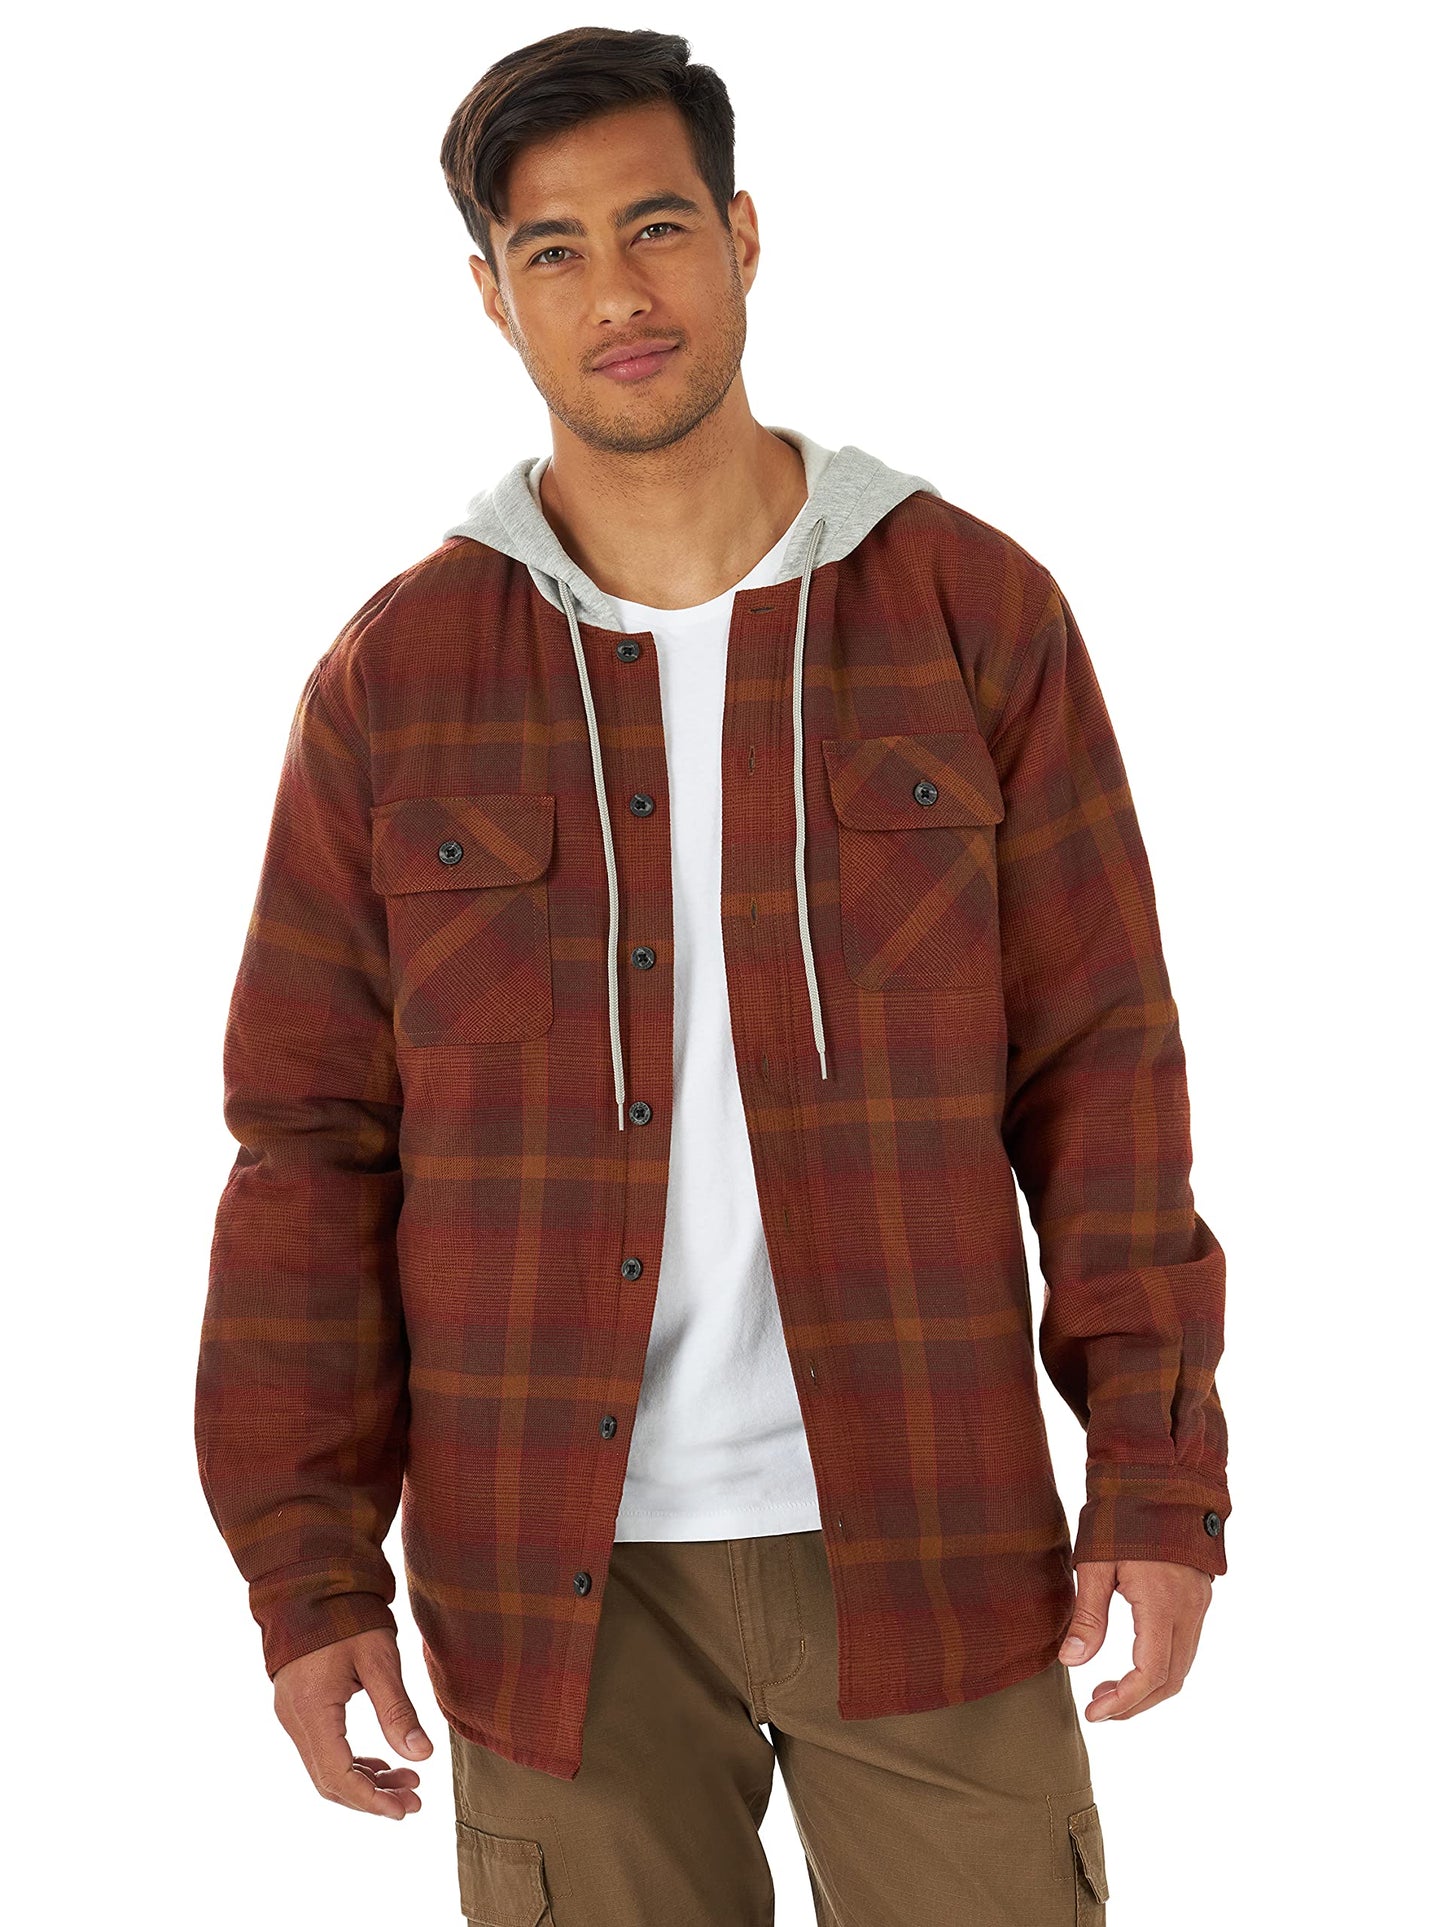 Wrangler Authentics Men's Long Sleeve Quilted Lined Flannel Shirt Jacket with Hood, Toffee, X-Large